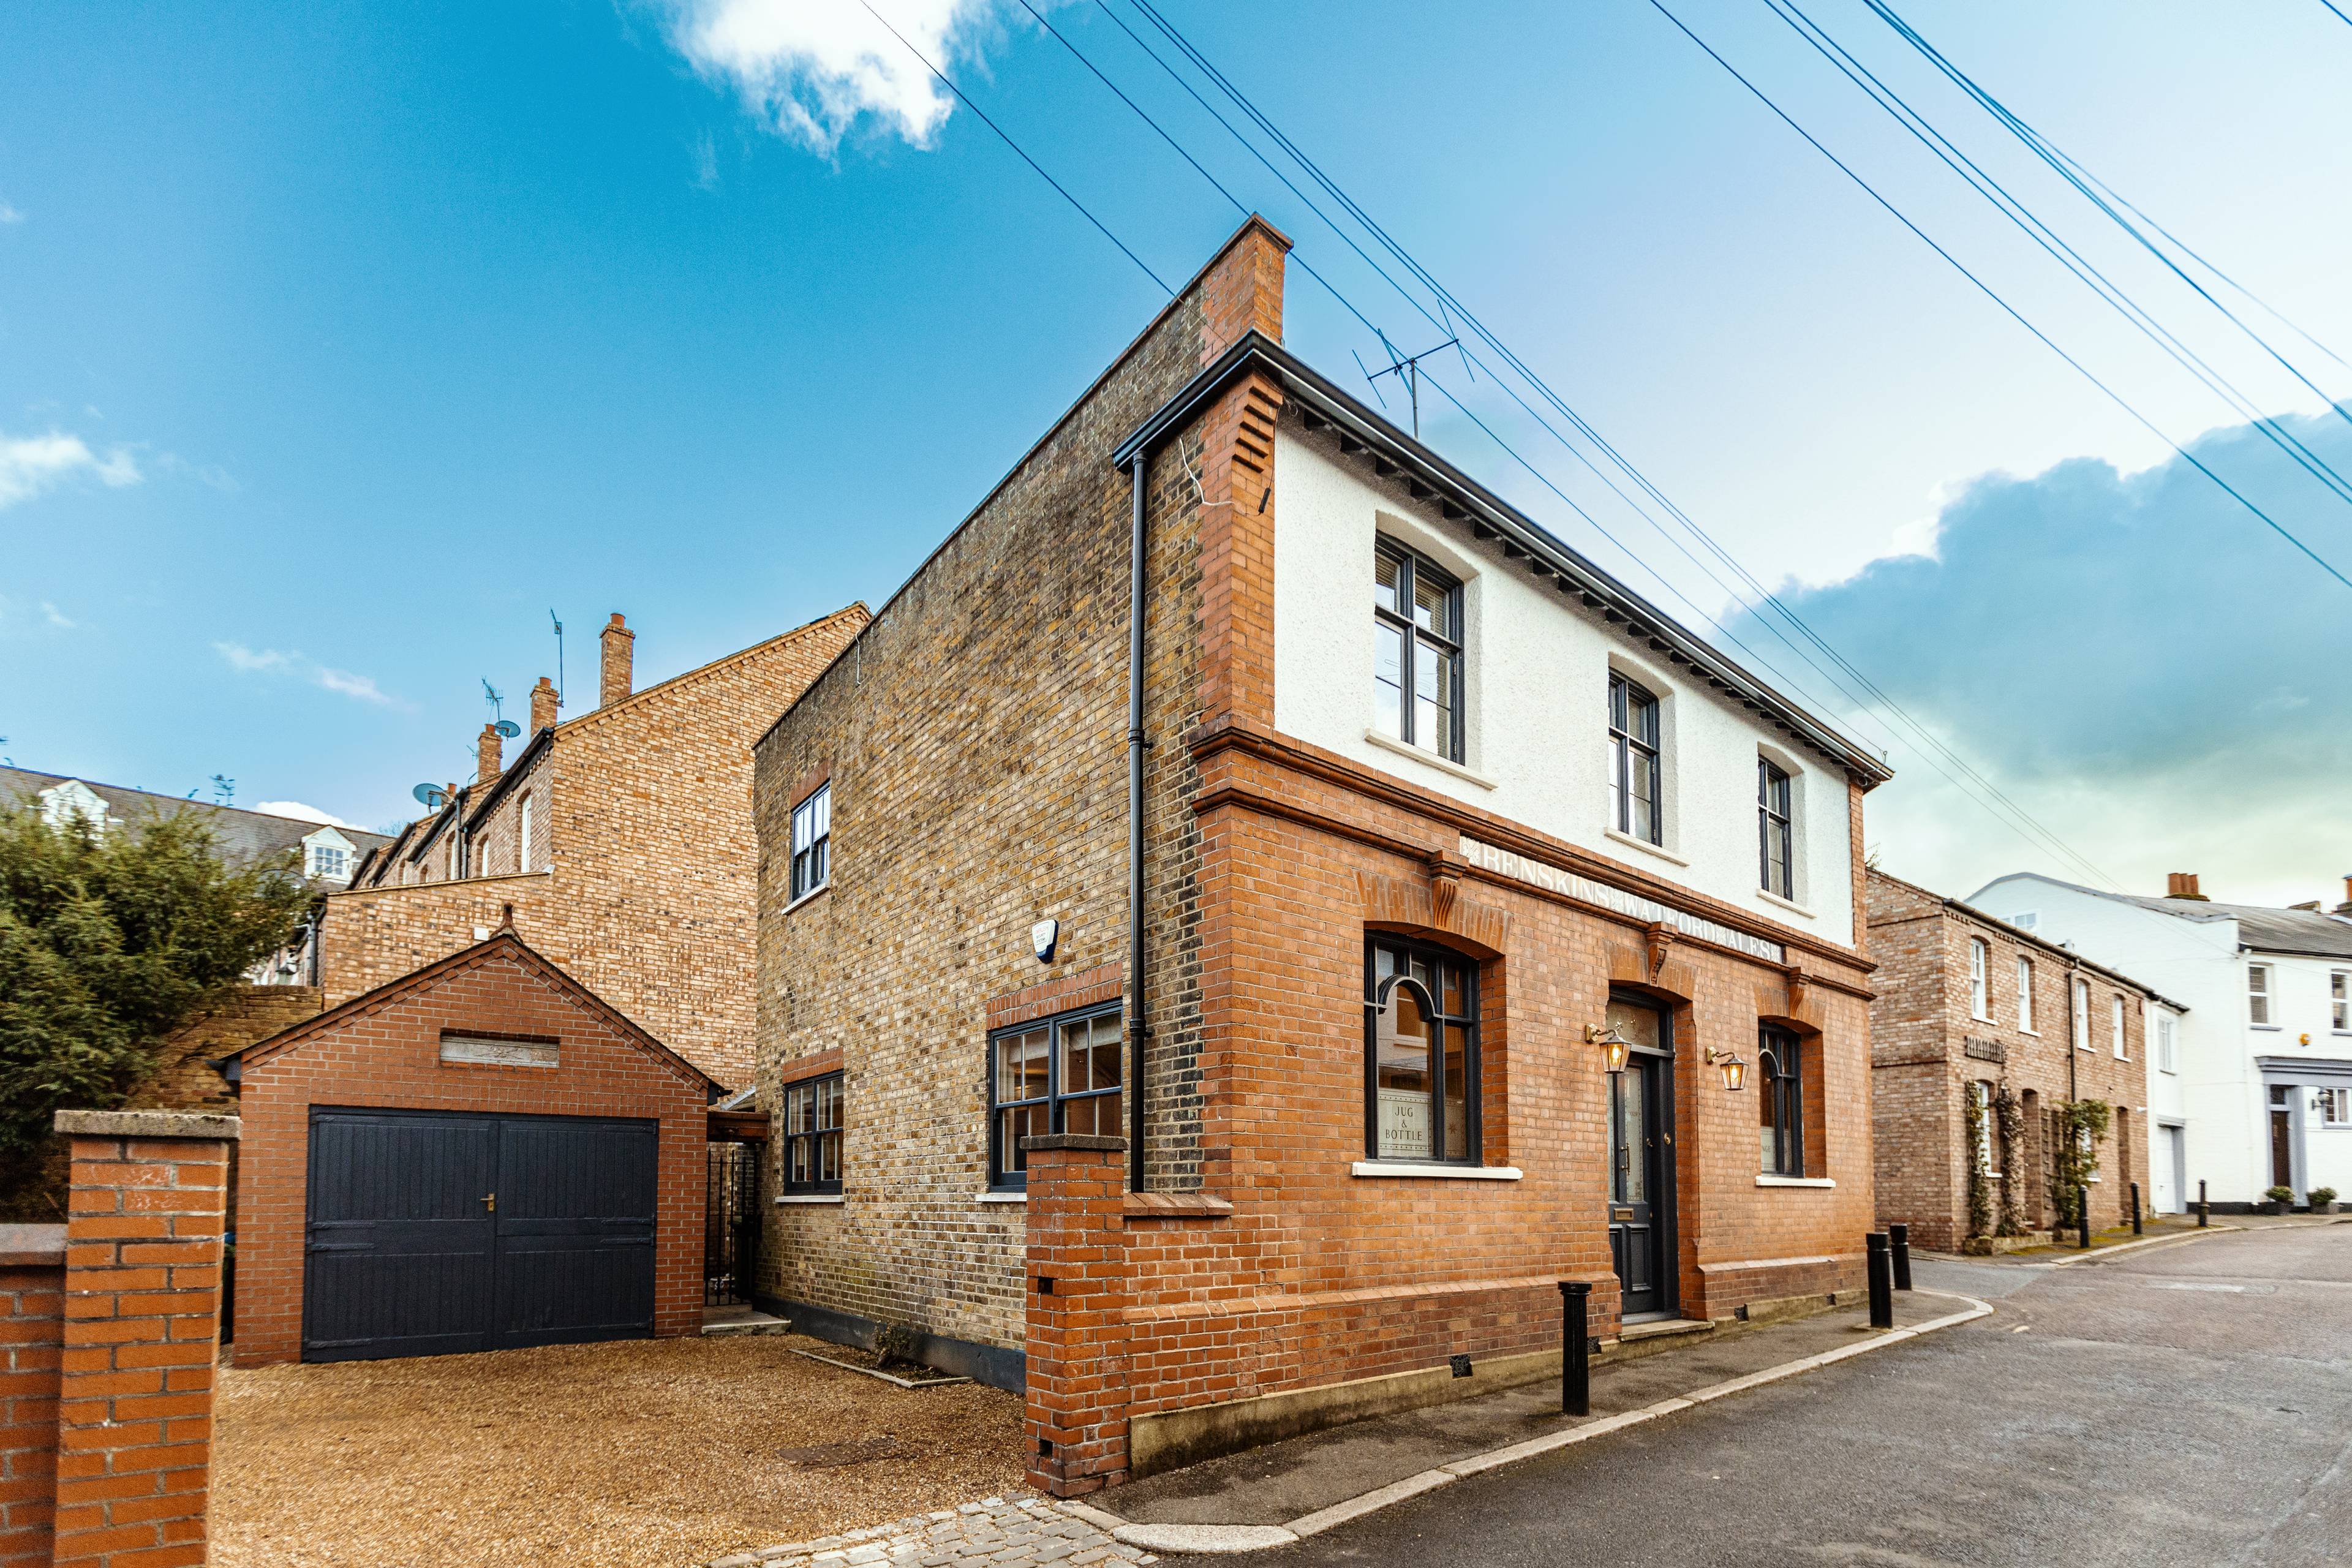 Own A Piece of History with this Iconic 4 Bedroom Detached Property, in the Heart of One of London’s Most Idyllic Villages, Harrow on the Hill.